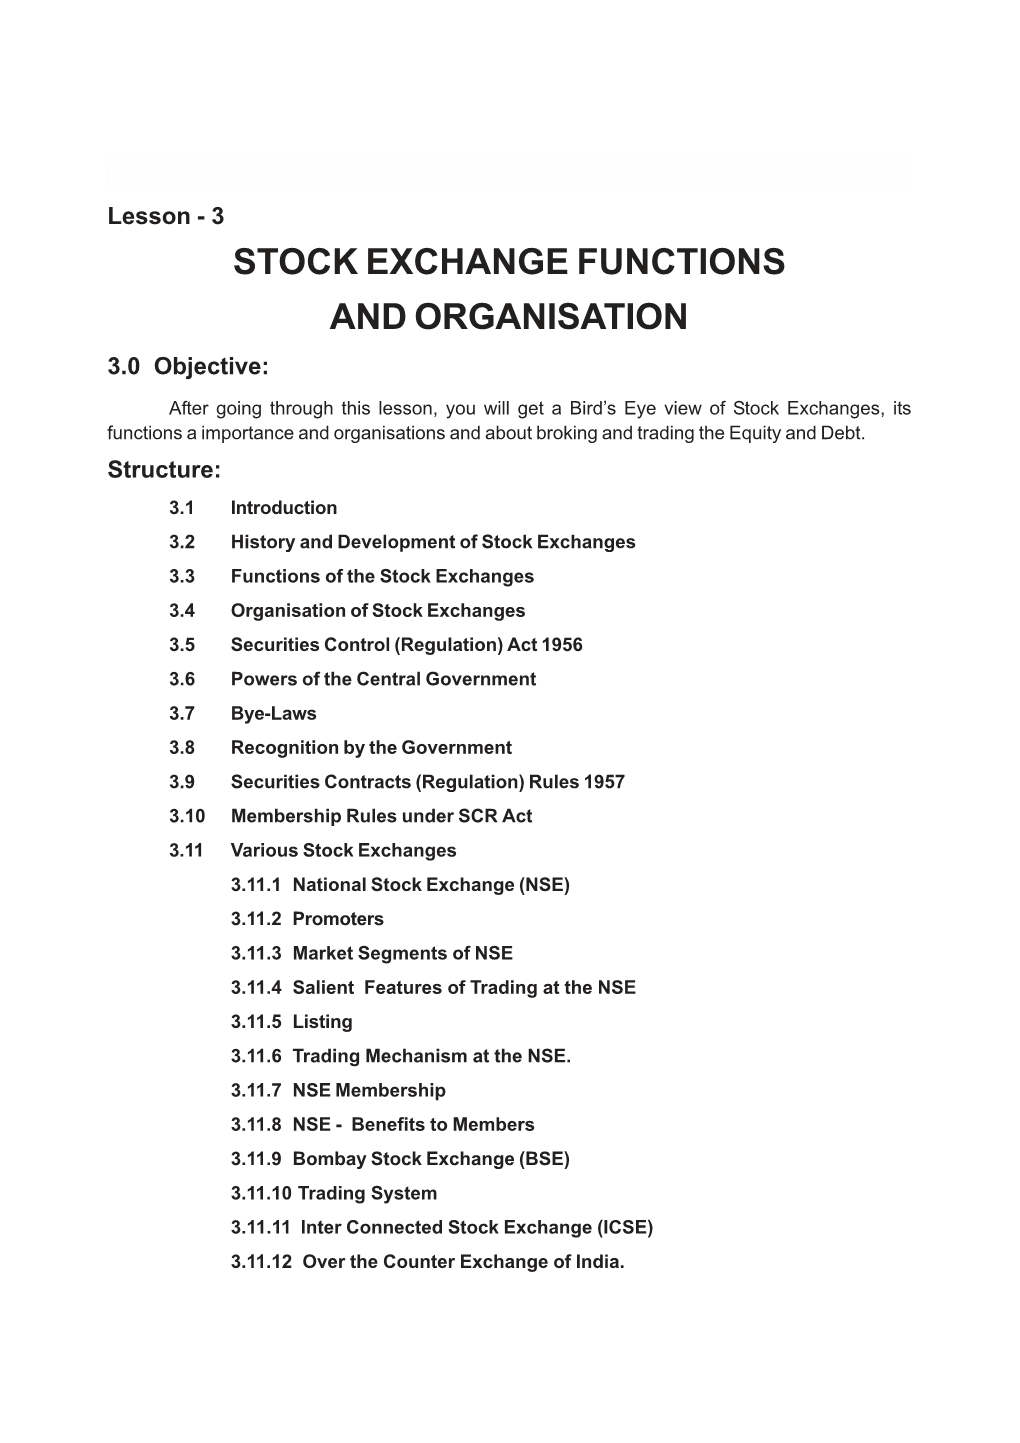 Stock Exchange Functions and Organisation Lesson - 3 STOCK EXCHANGE FUNCTIONS and ORGANISATION 3.0 Objective